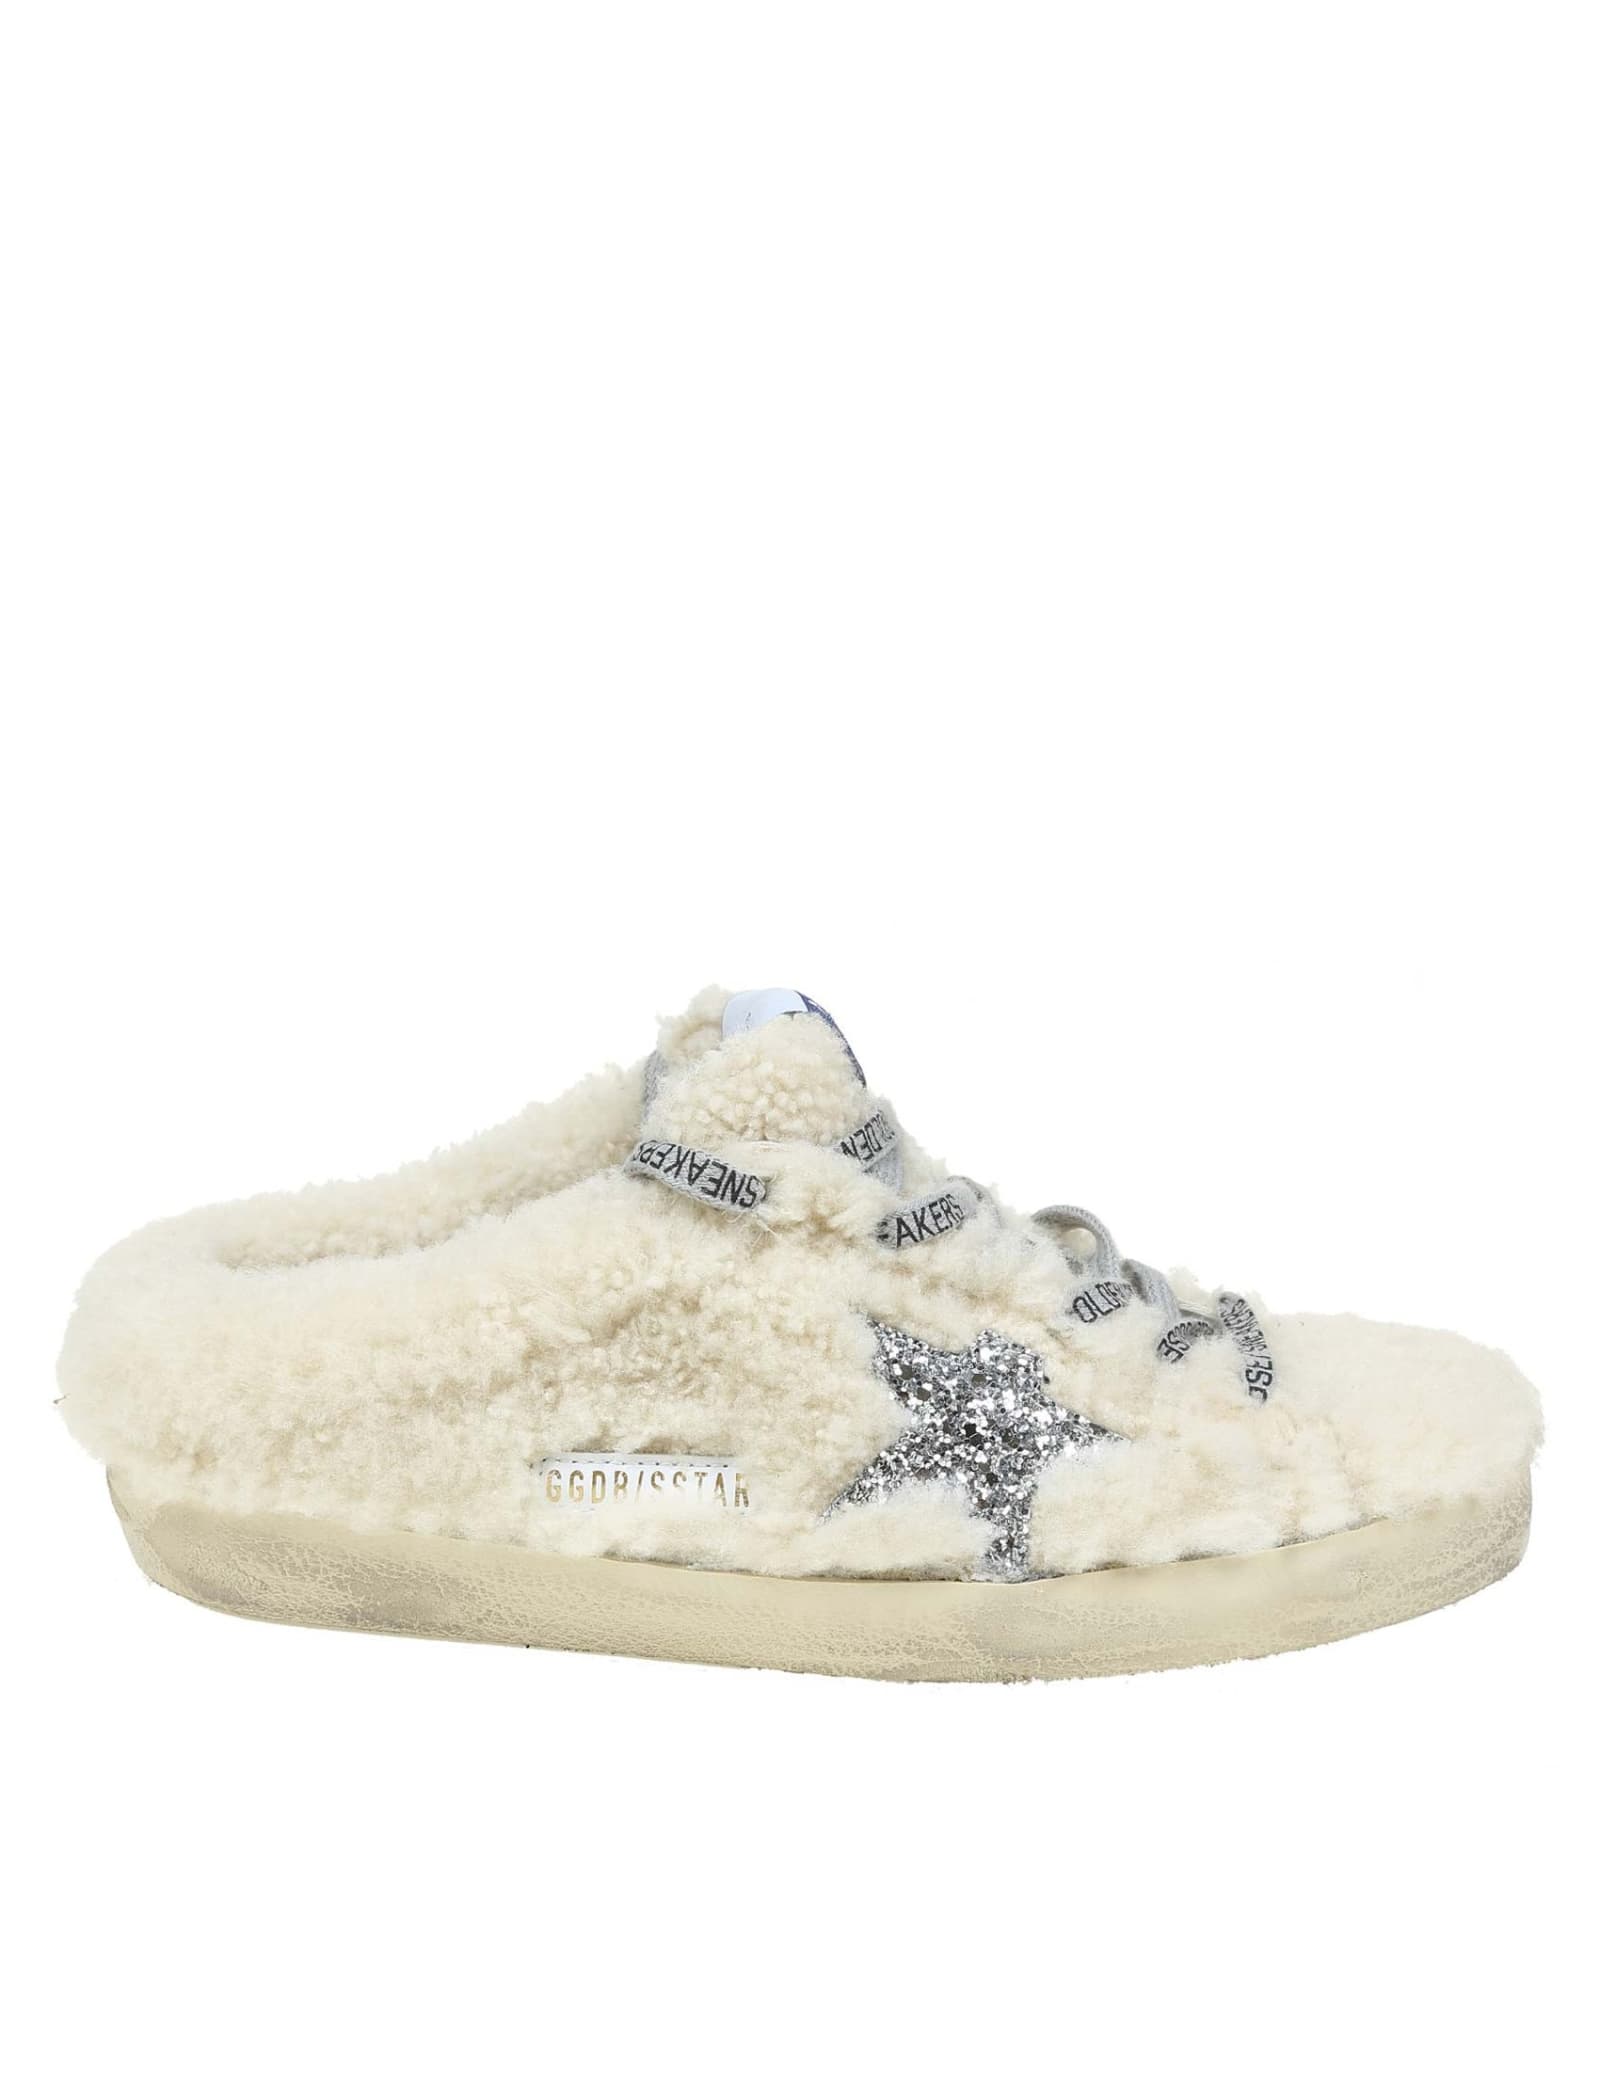 Buy Golden Goose Mules Superstar In Shearling online, shop Golden Goose shoes with free shipping